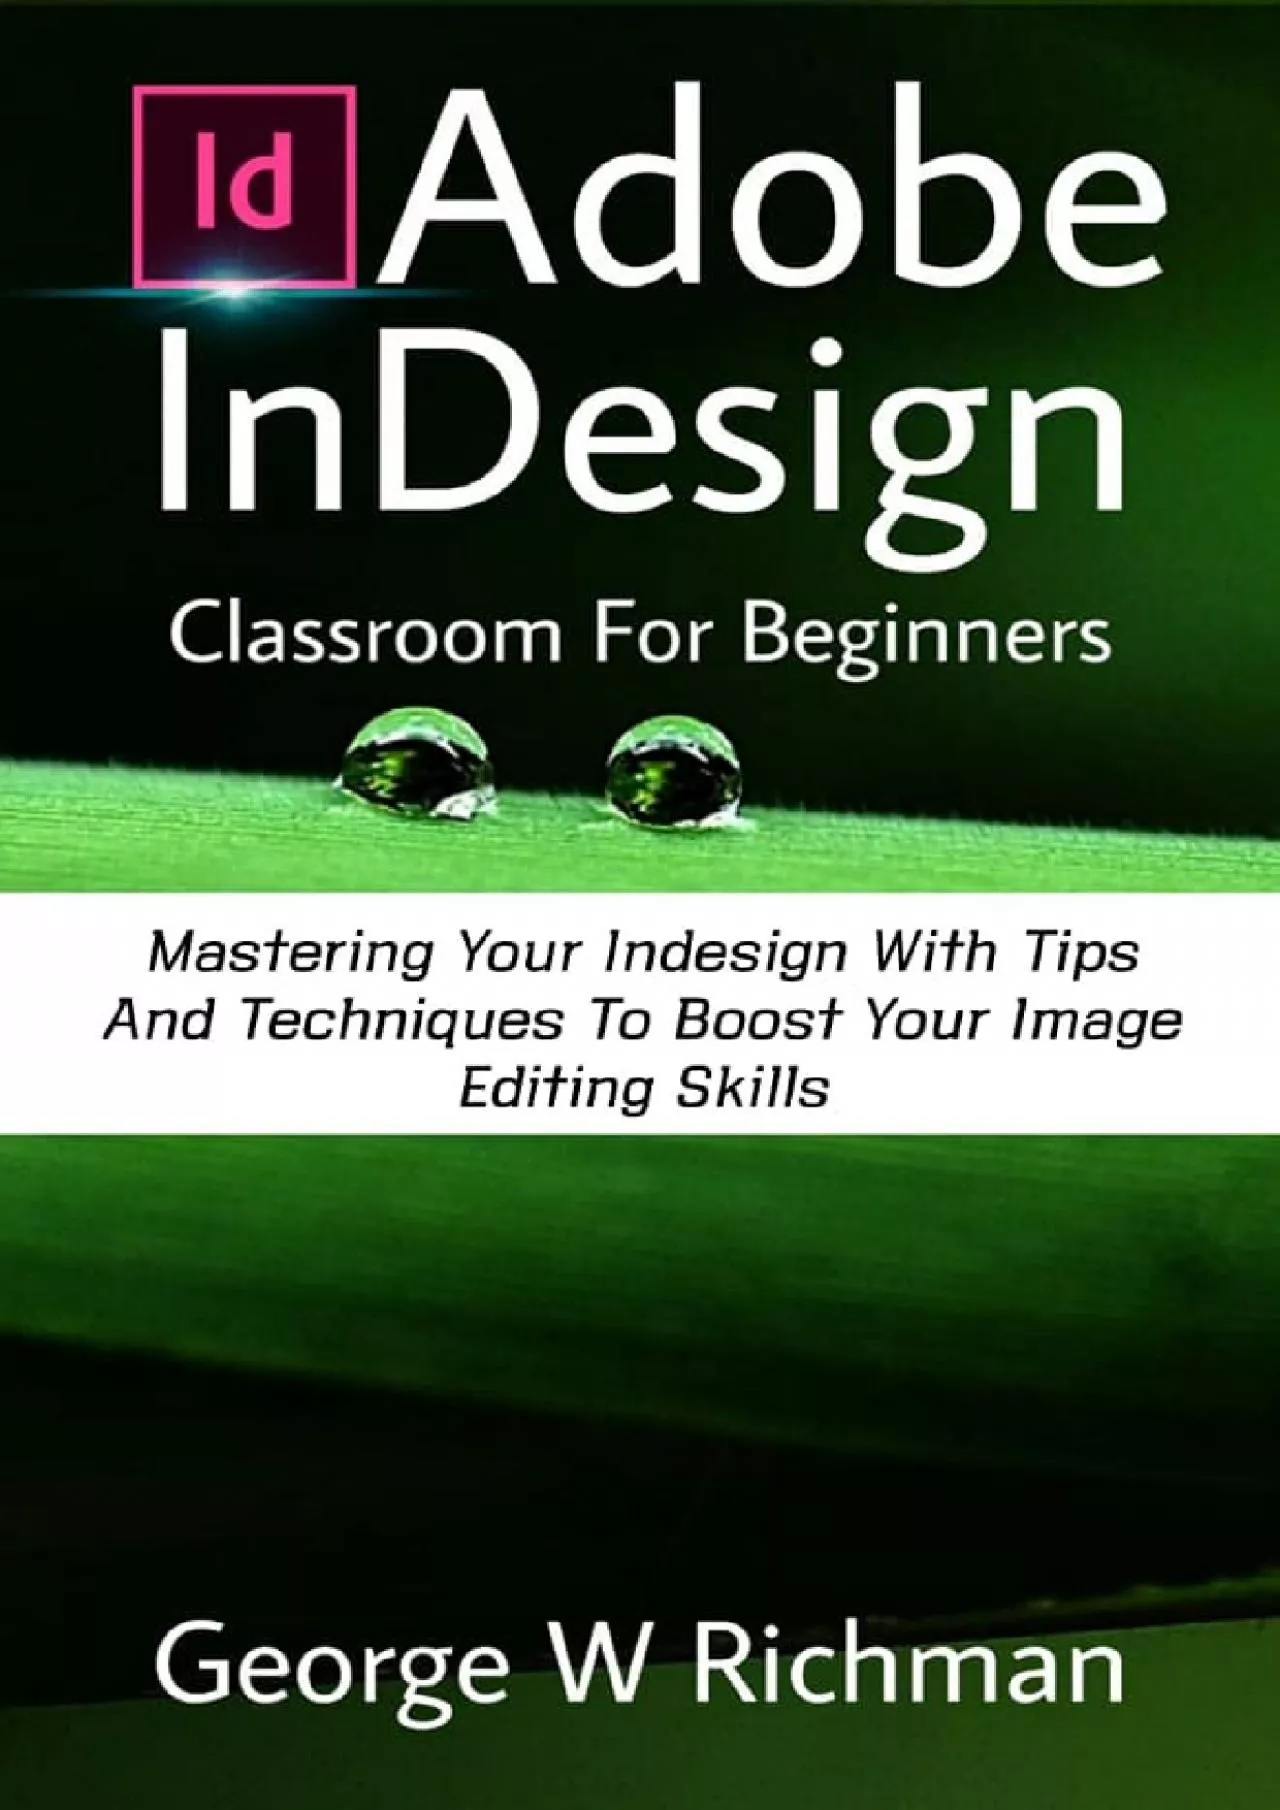 (DOWNLOAD)-Adobe Indesign Classroom For Beginners: Mastering Your Indesign With Tips And